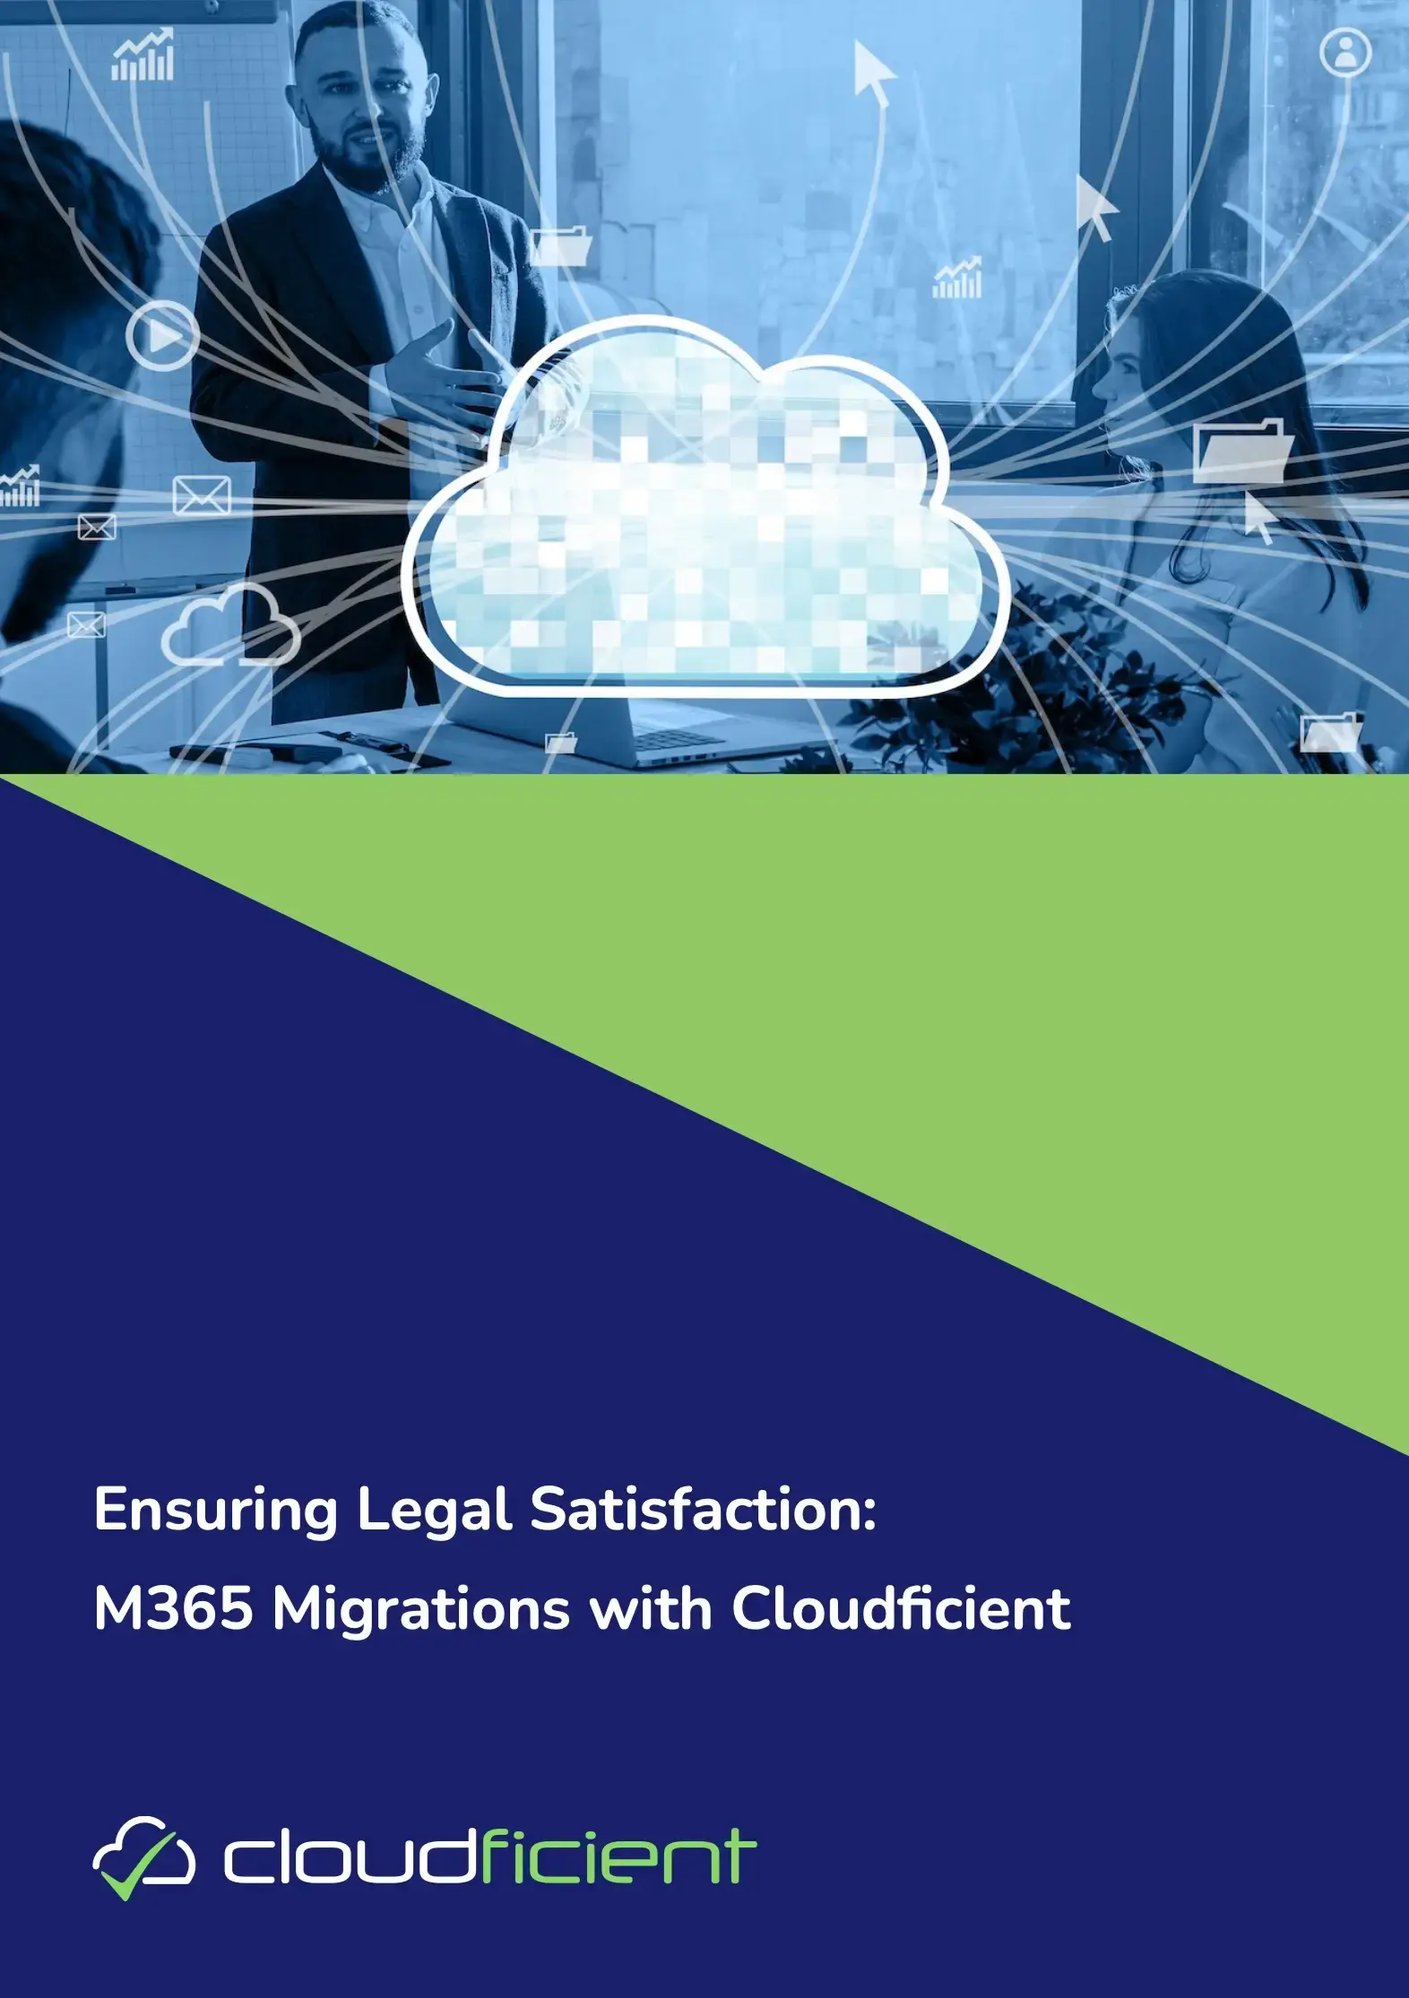 Ensuring Legal Satisfaction - M365 Migrations with Cloudficient v0.04.pdf 2024-04-29 at 3.55.44 PM